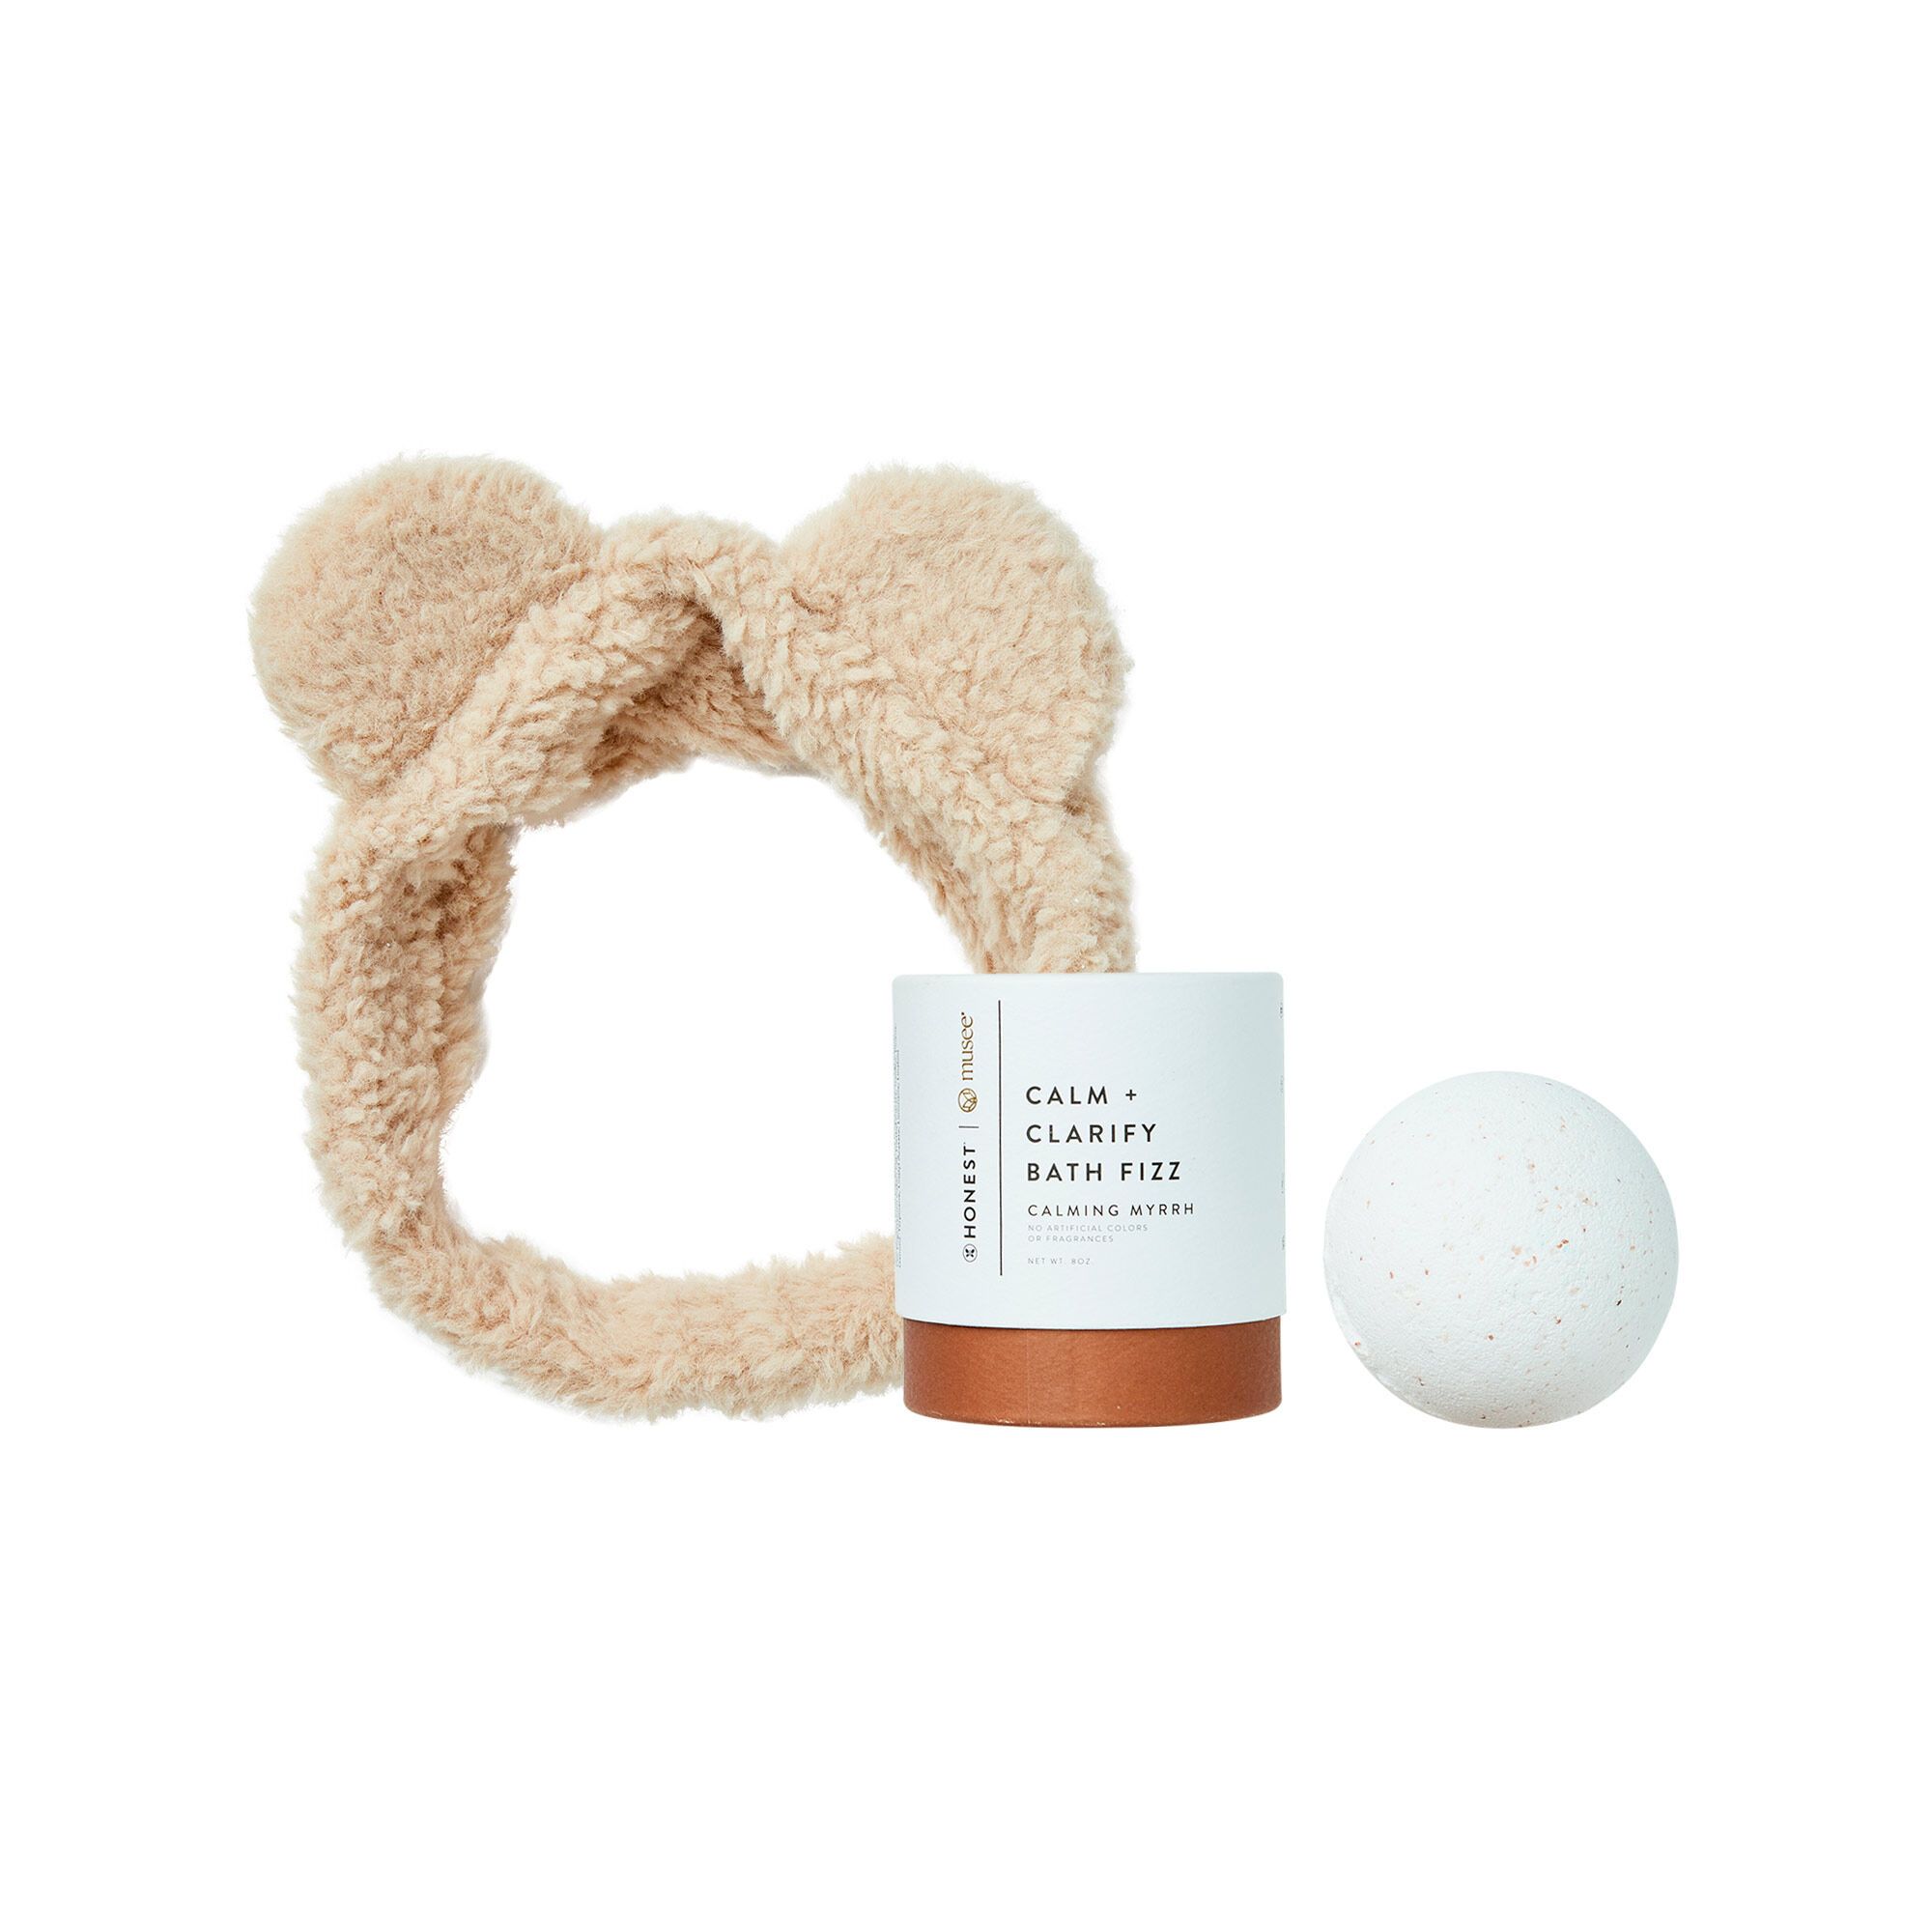 Relaxation Bath Duo | The Honest Company